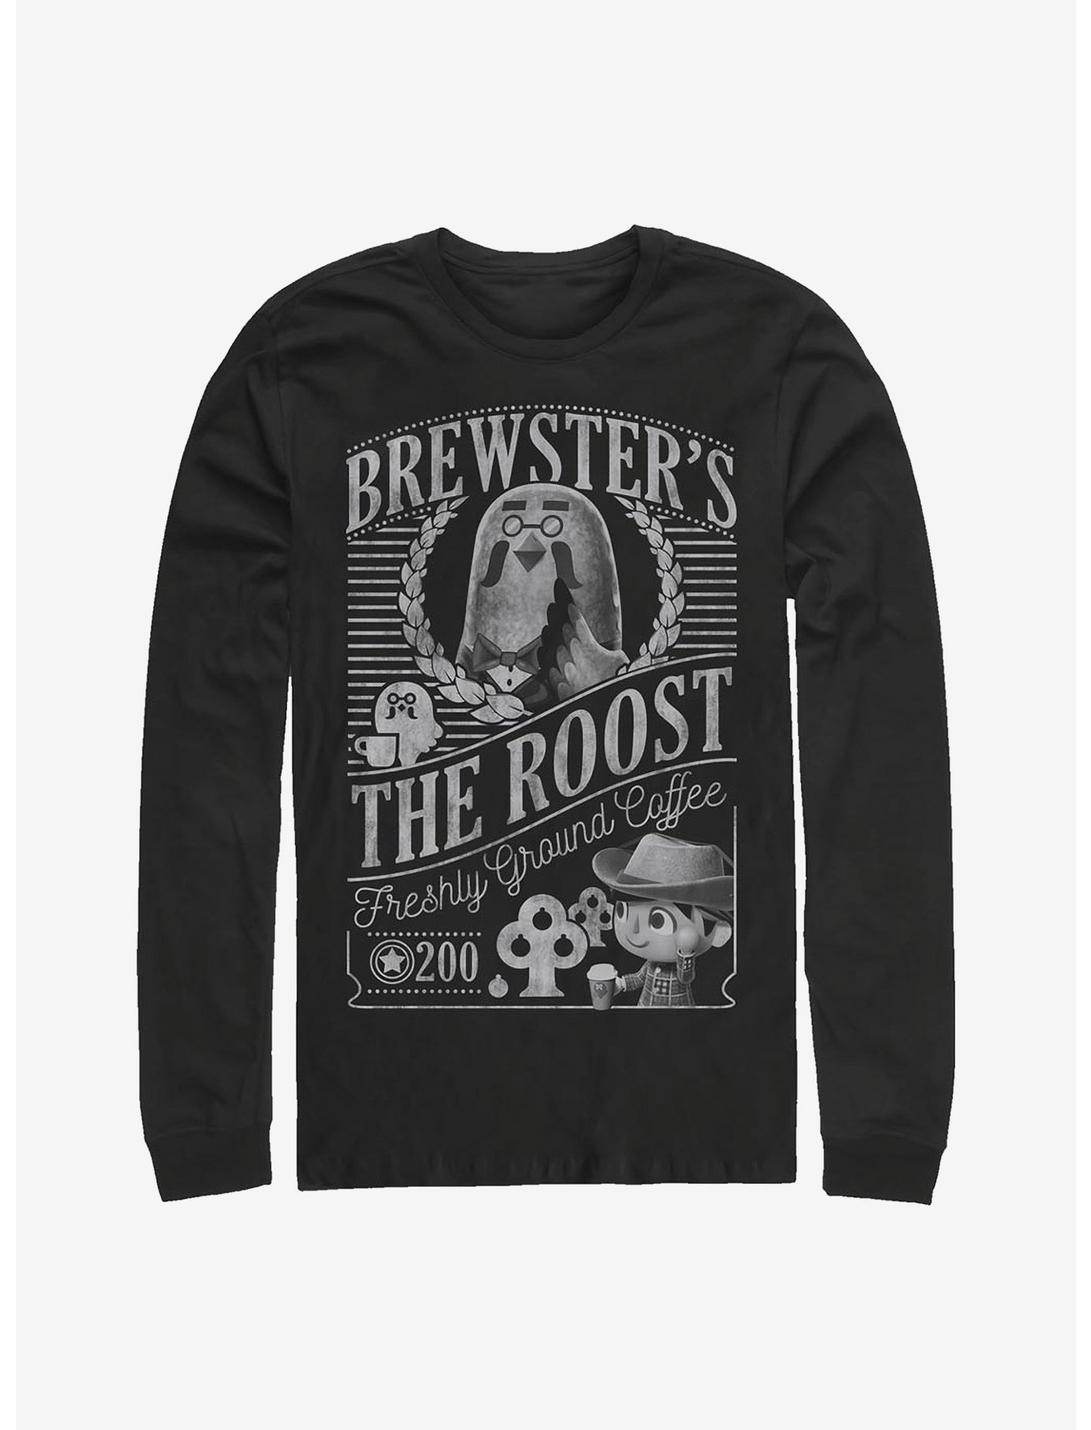 Animal Crossing Brewster's Cafe The Roost Long-Sleeve T-Shirt, BLACK, hi-res